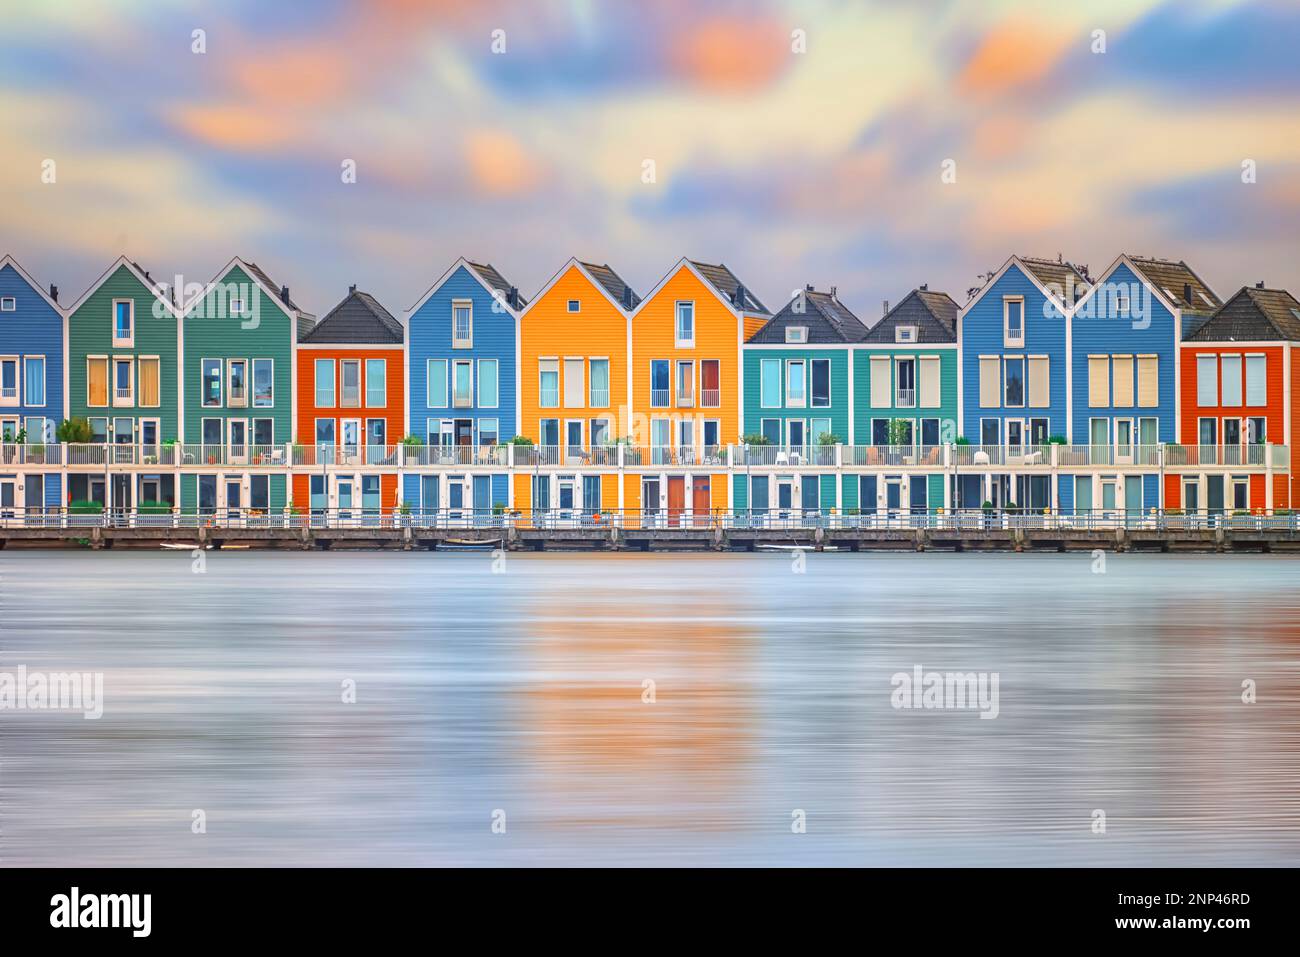 Colorful wooden houses in Holland Stock Photo